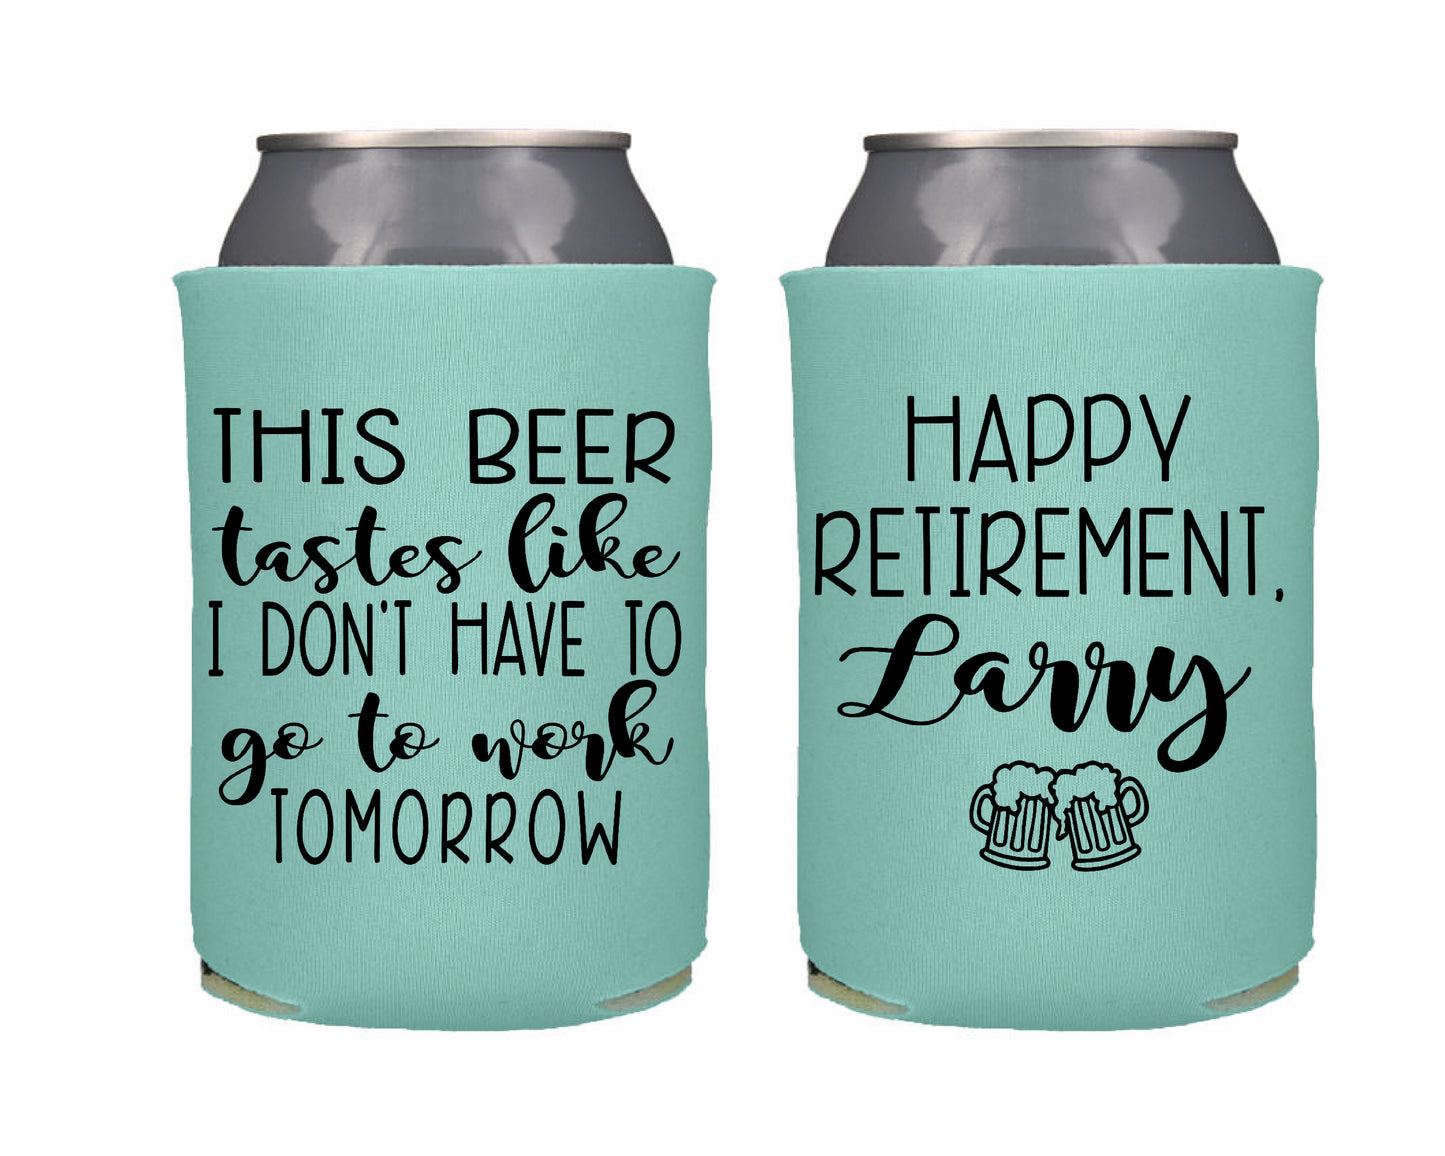 This Beer Tastes Like I am not Going to Work Tomorrow Retirement Screen printed Can Cooler